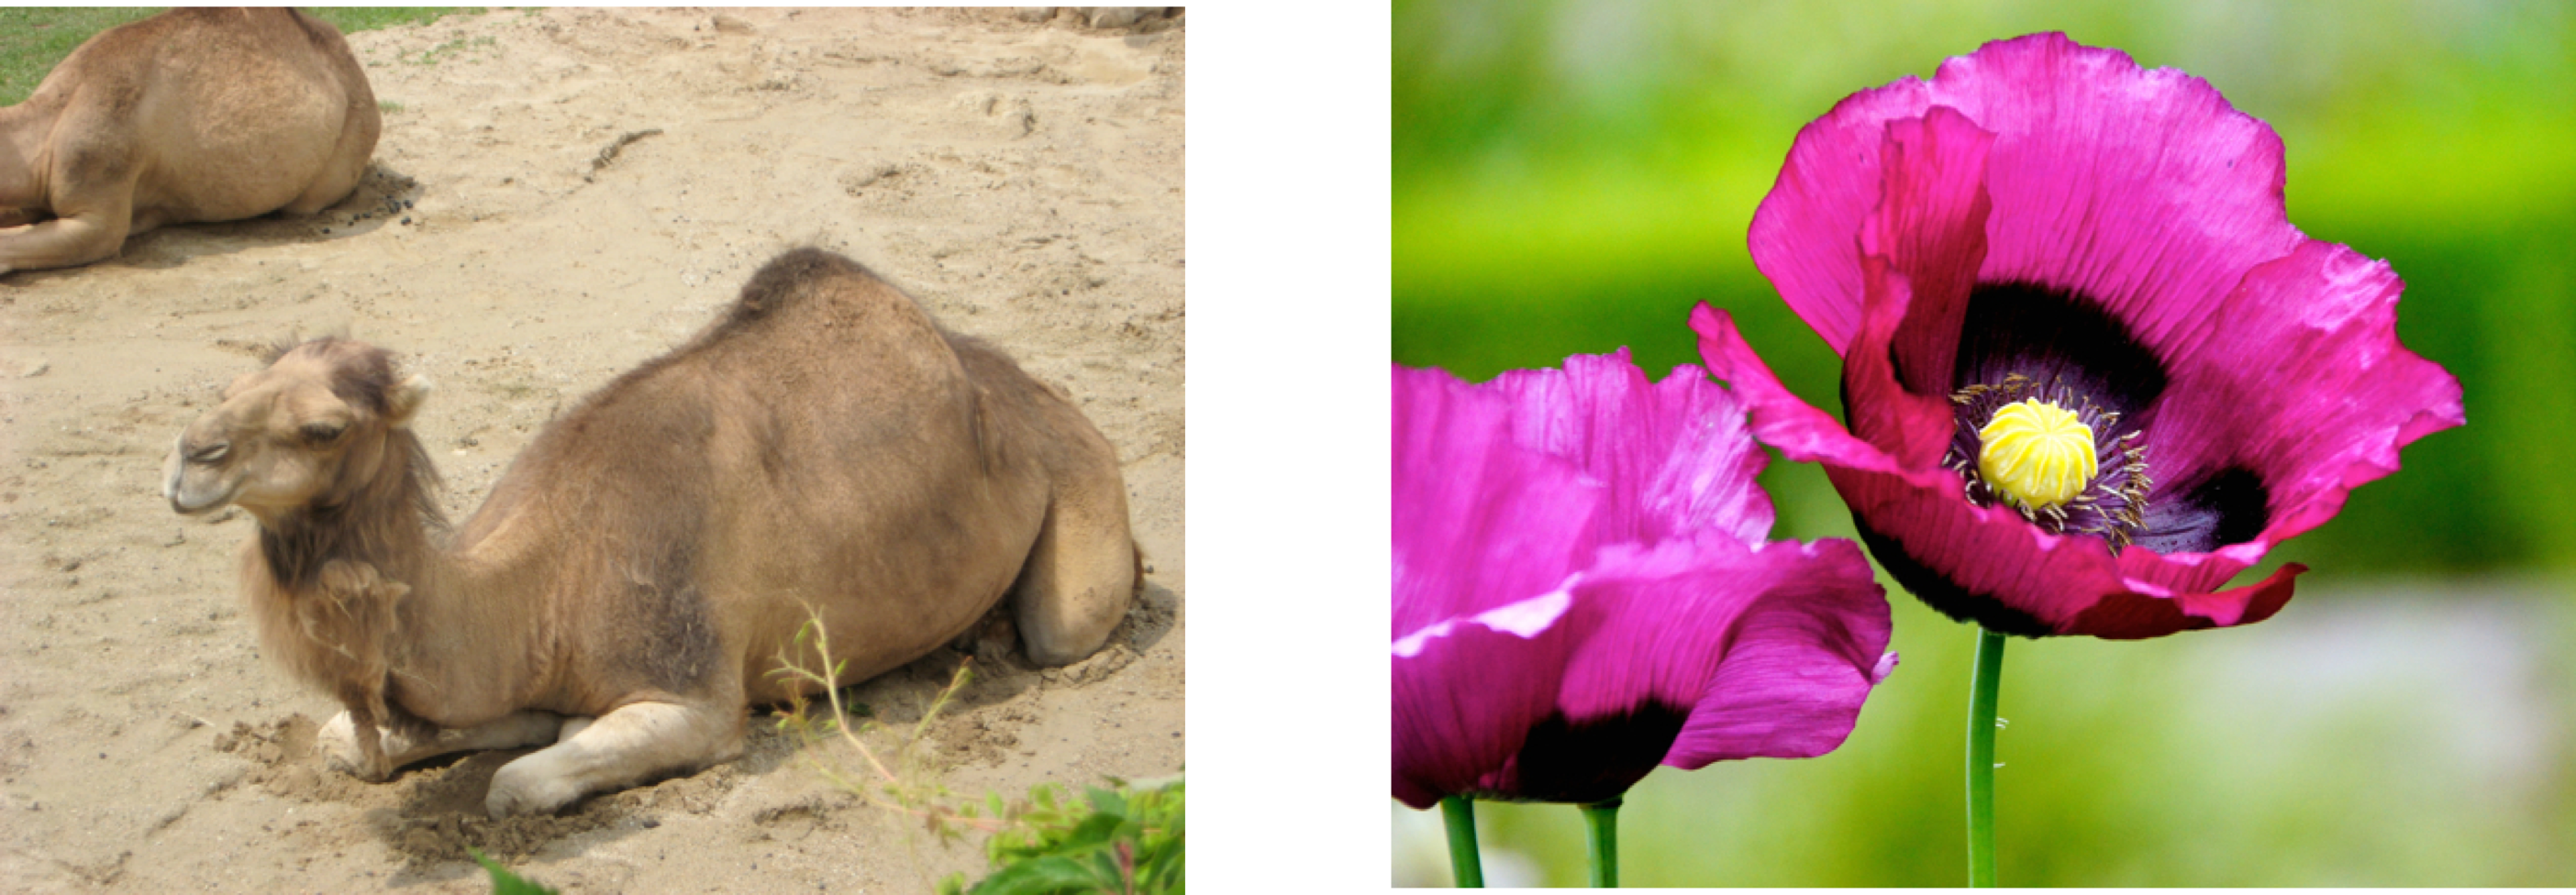 Camel and Flower